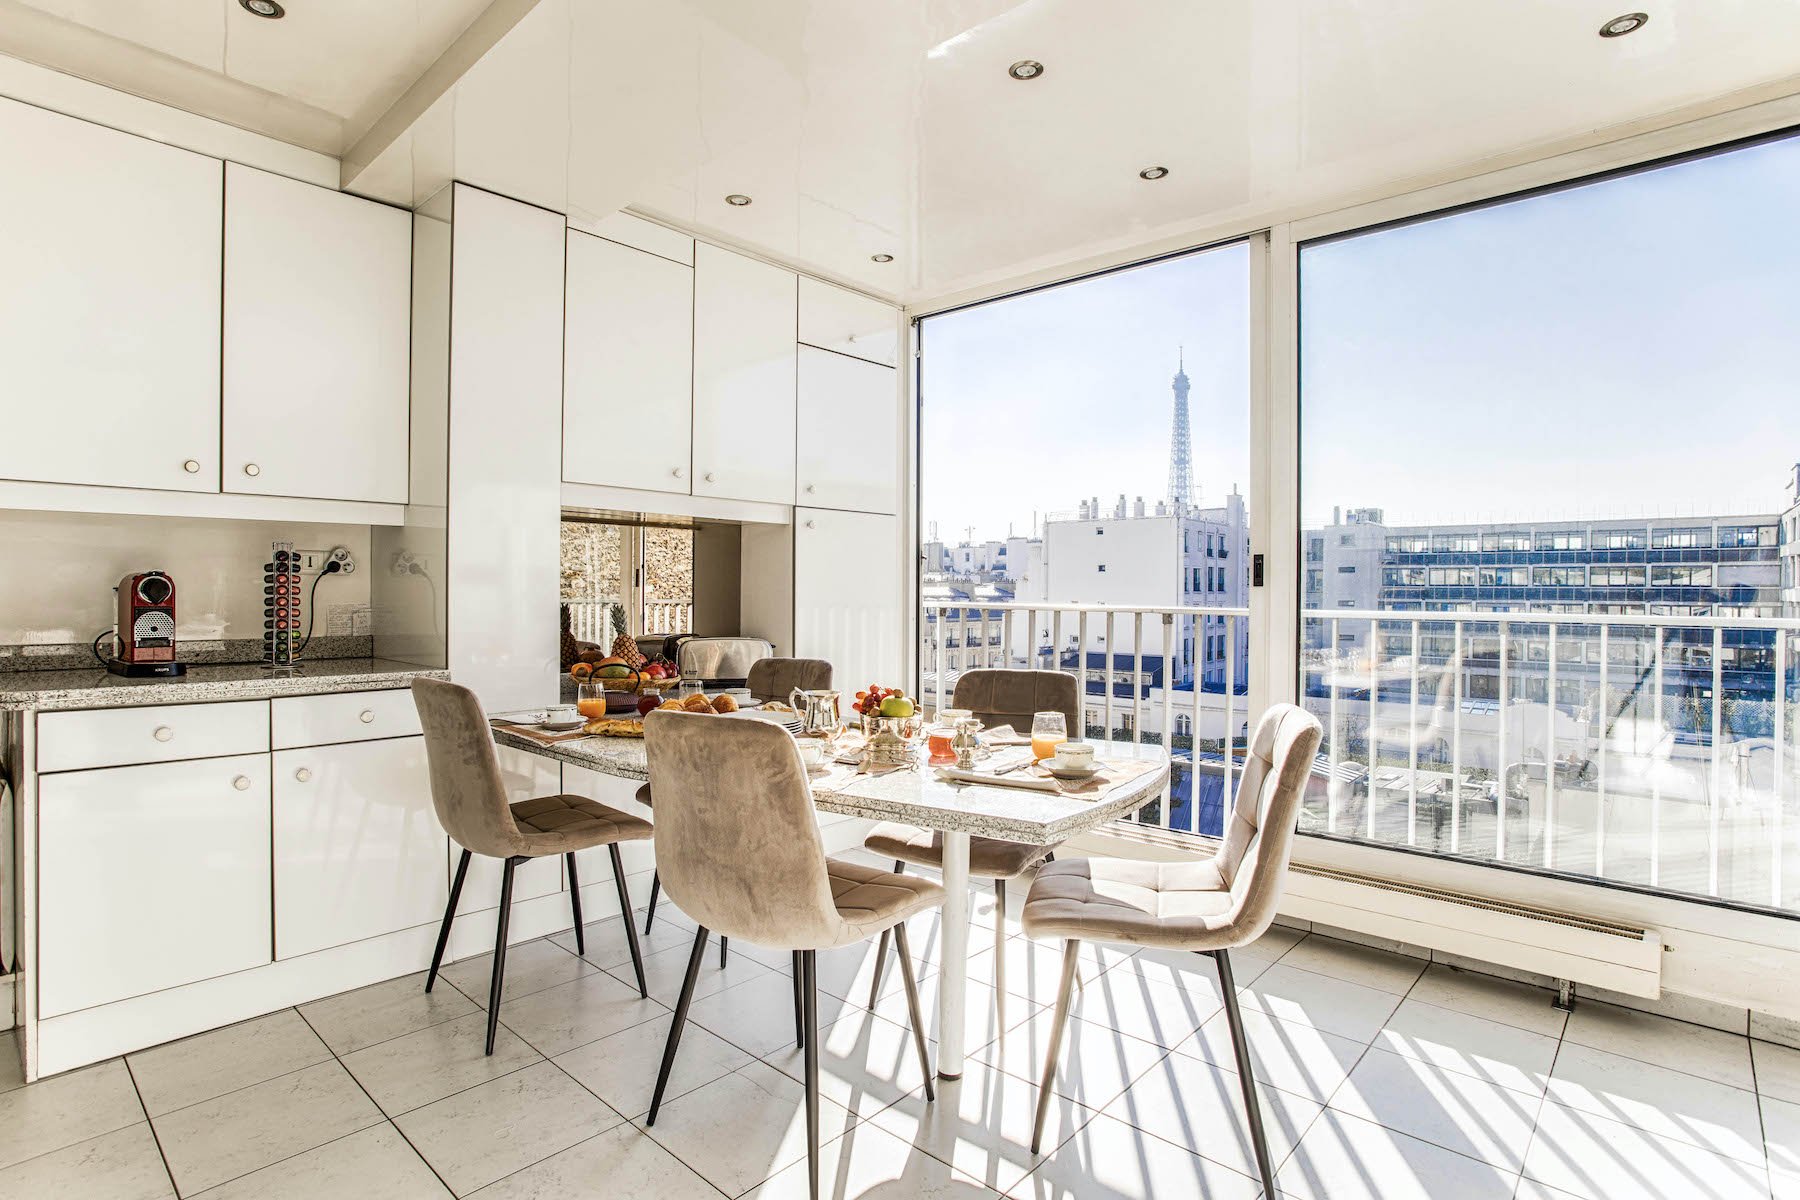 Prestigious apartment in the center of Paris with rooftop view of the Eiffel Tower near Trocadéro